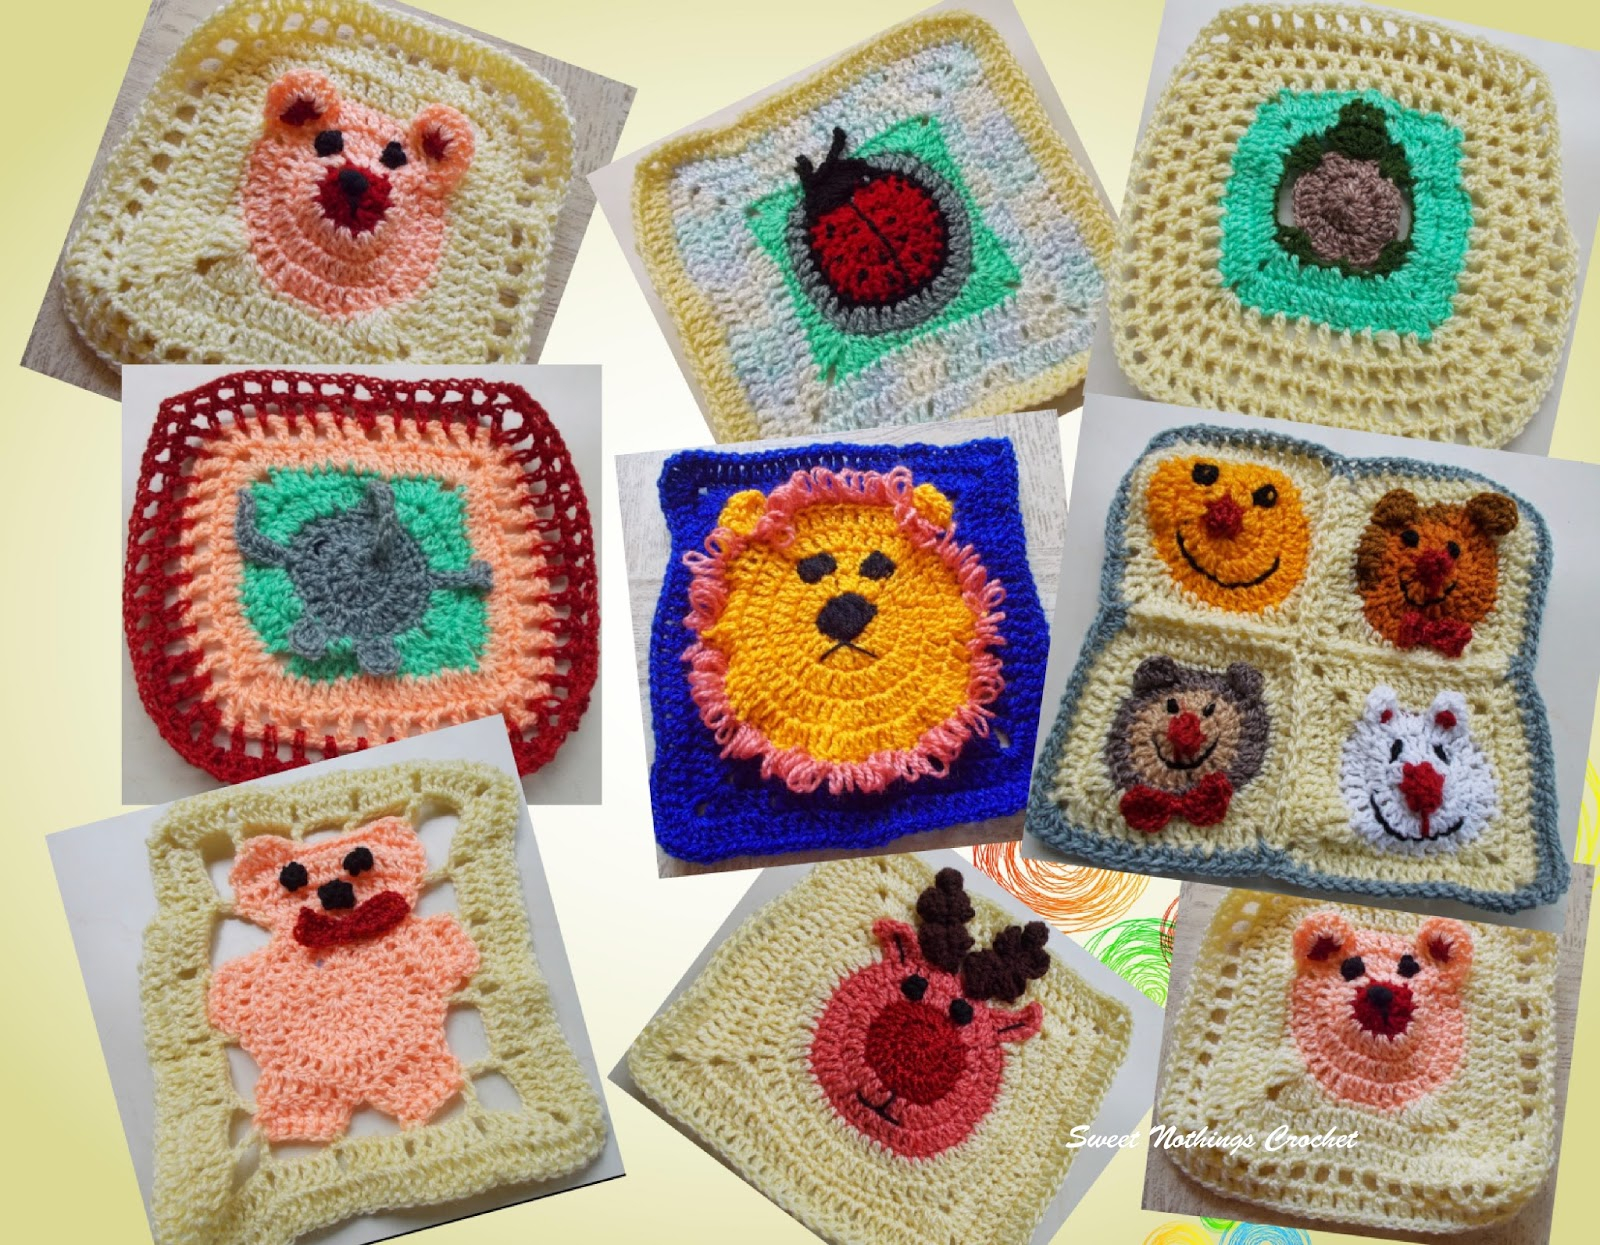 Crochet Granny Square Pattern Sweet Nothings Crochet Really Cute Animal Granny Squares